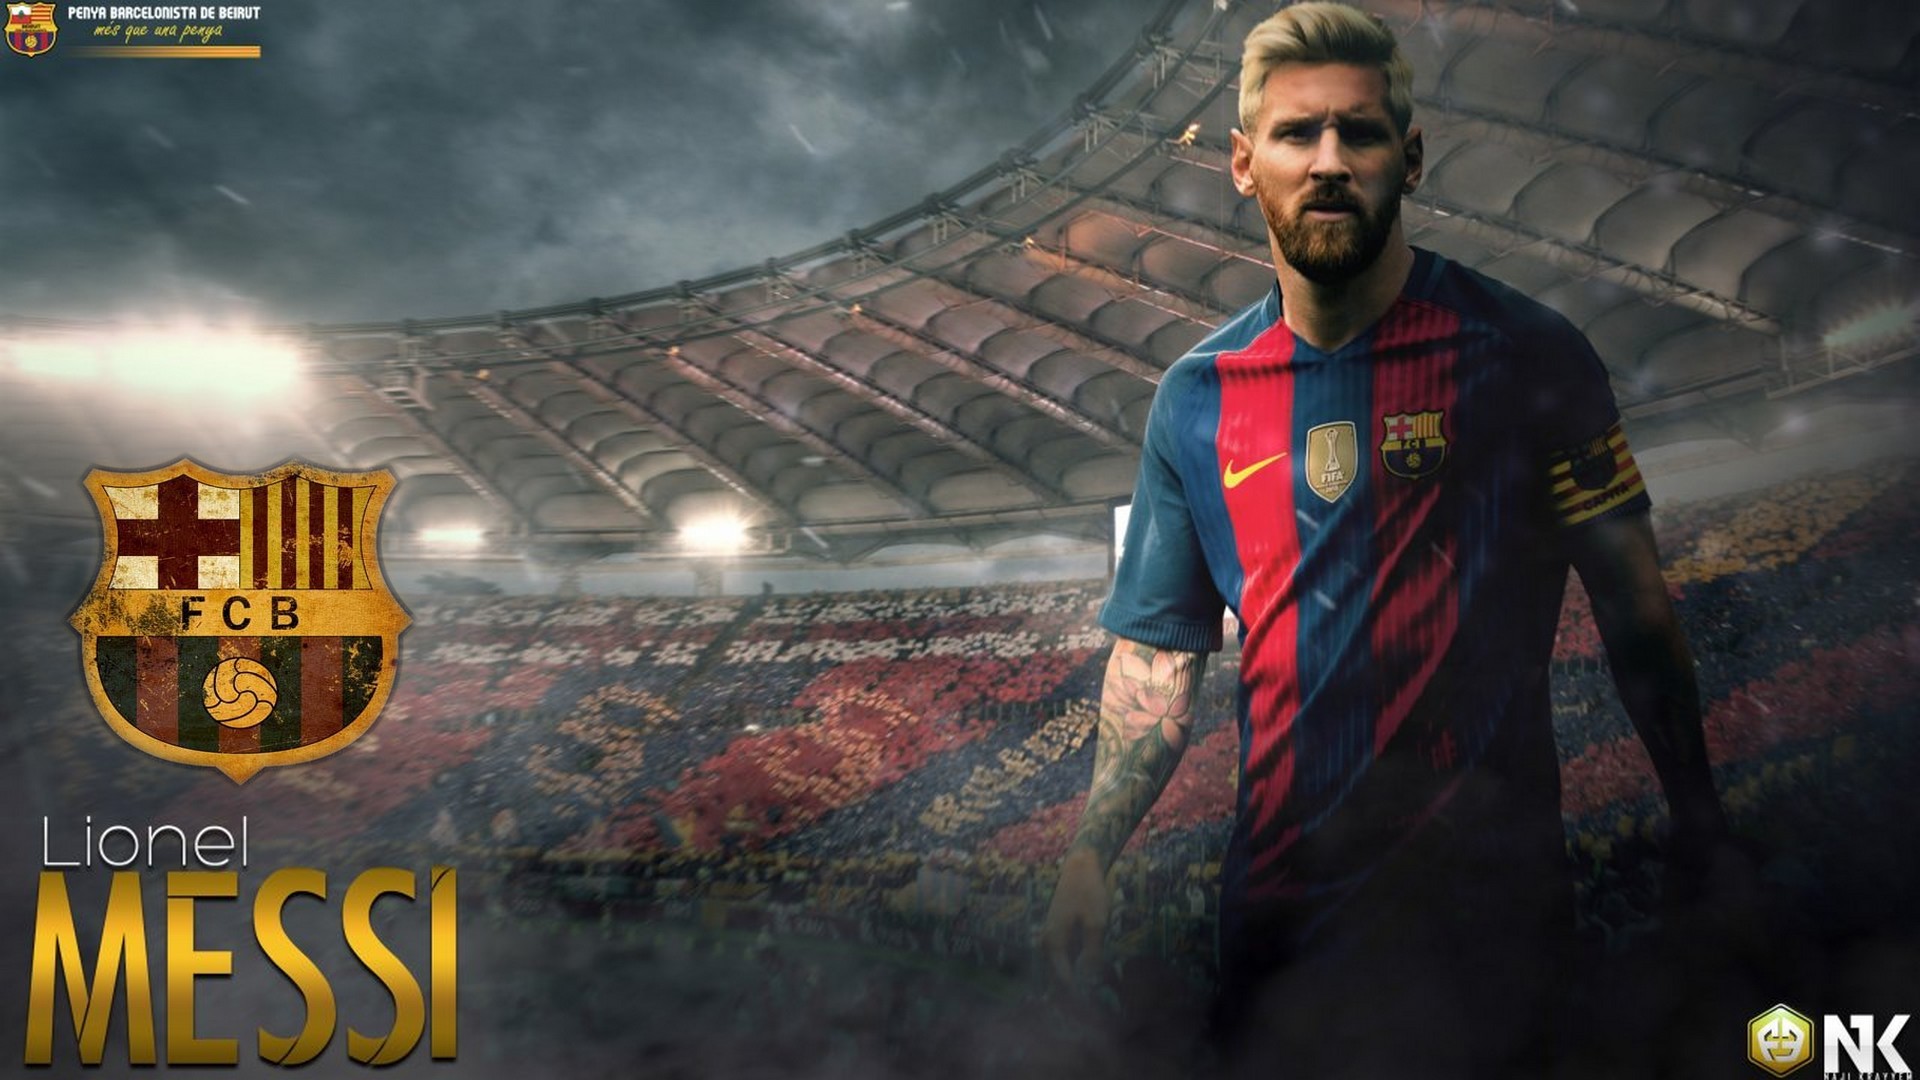 Wallpapers HD Lionel Messi Barcelona With Resolution 1920X1080 pixel. You can make this wallpaper for your Mac or Windows Desktop Background, iPhone, Android or Tablet and another Smartphone device for free